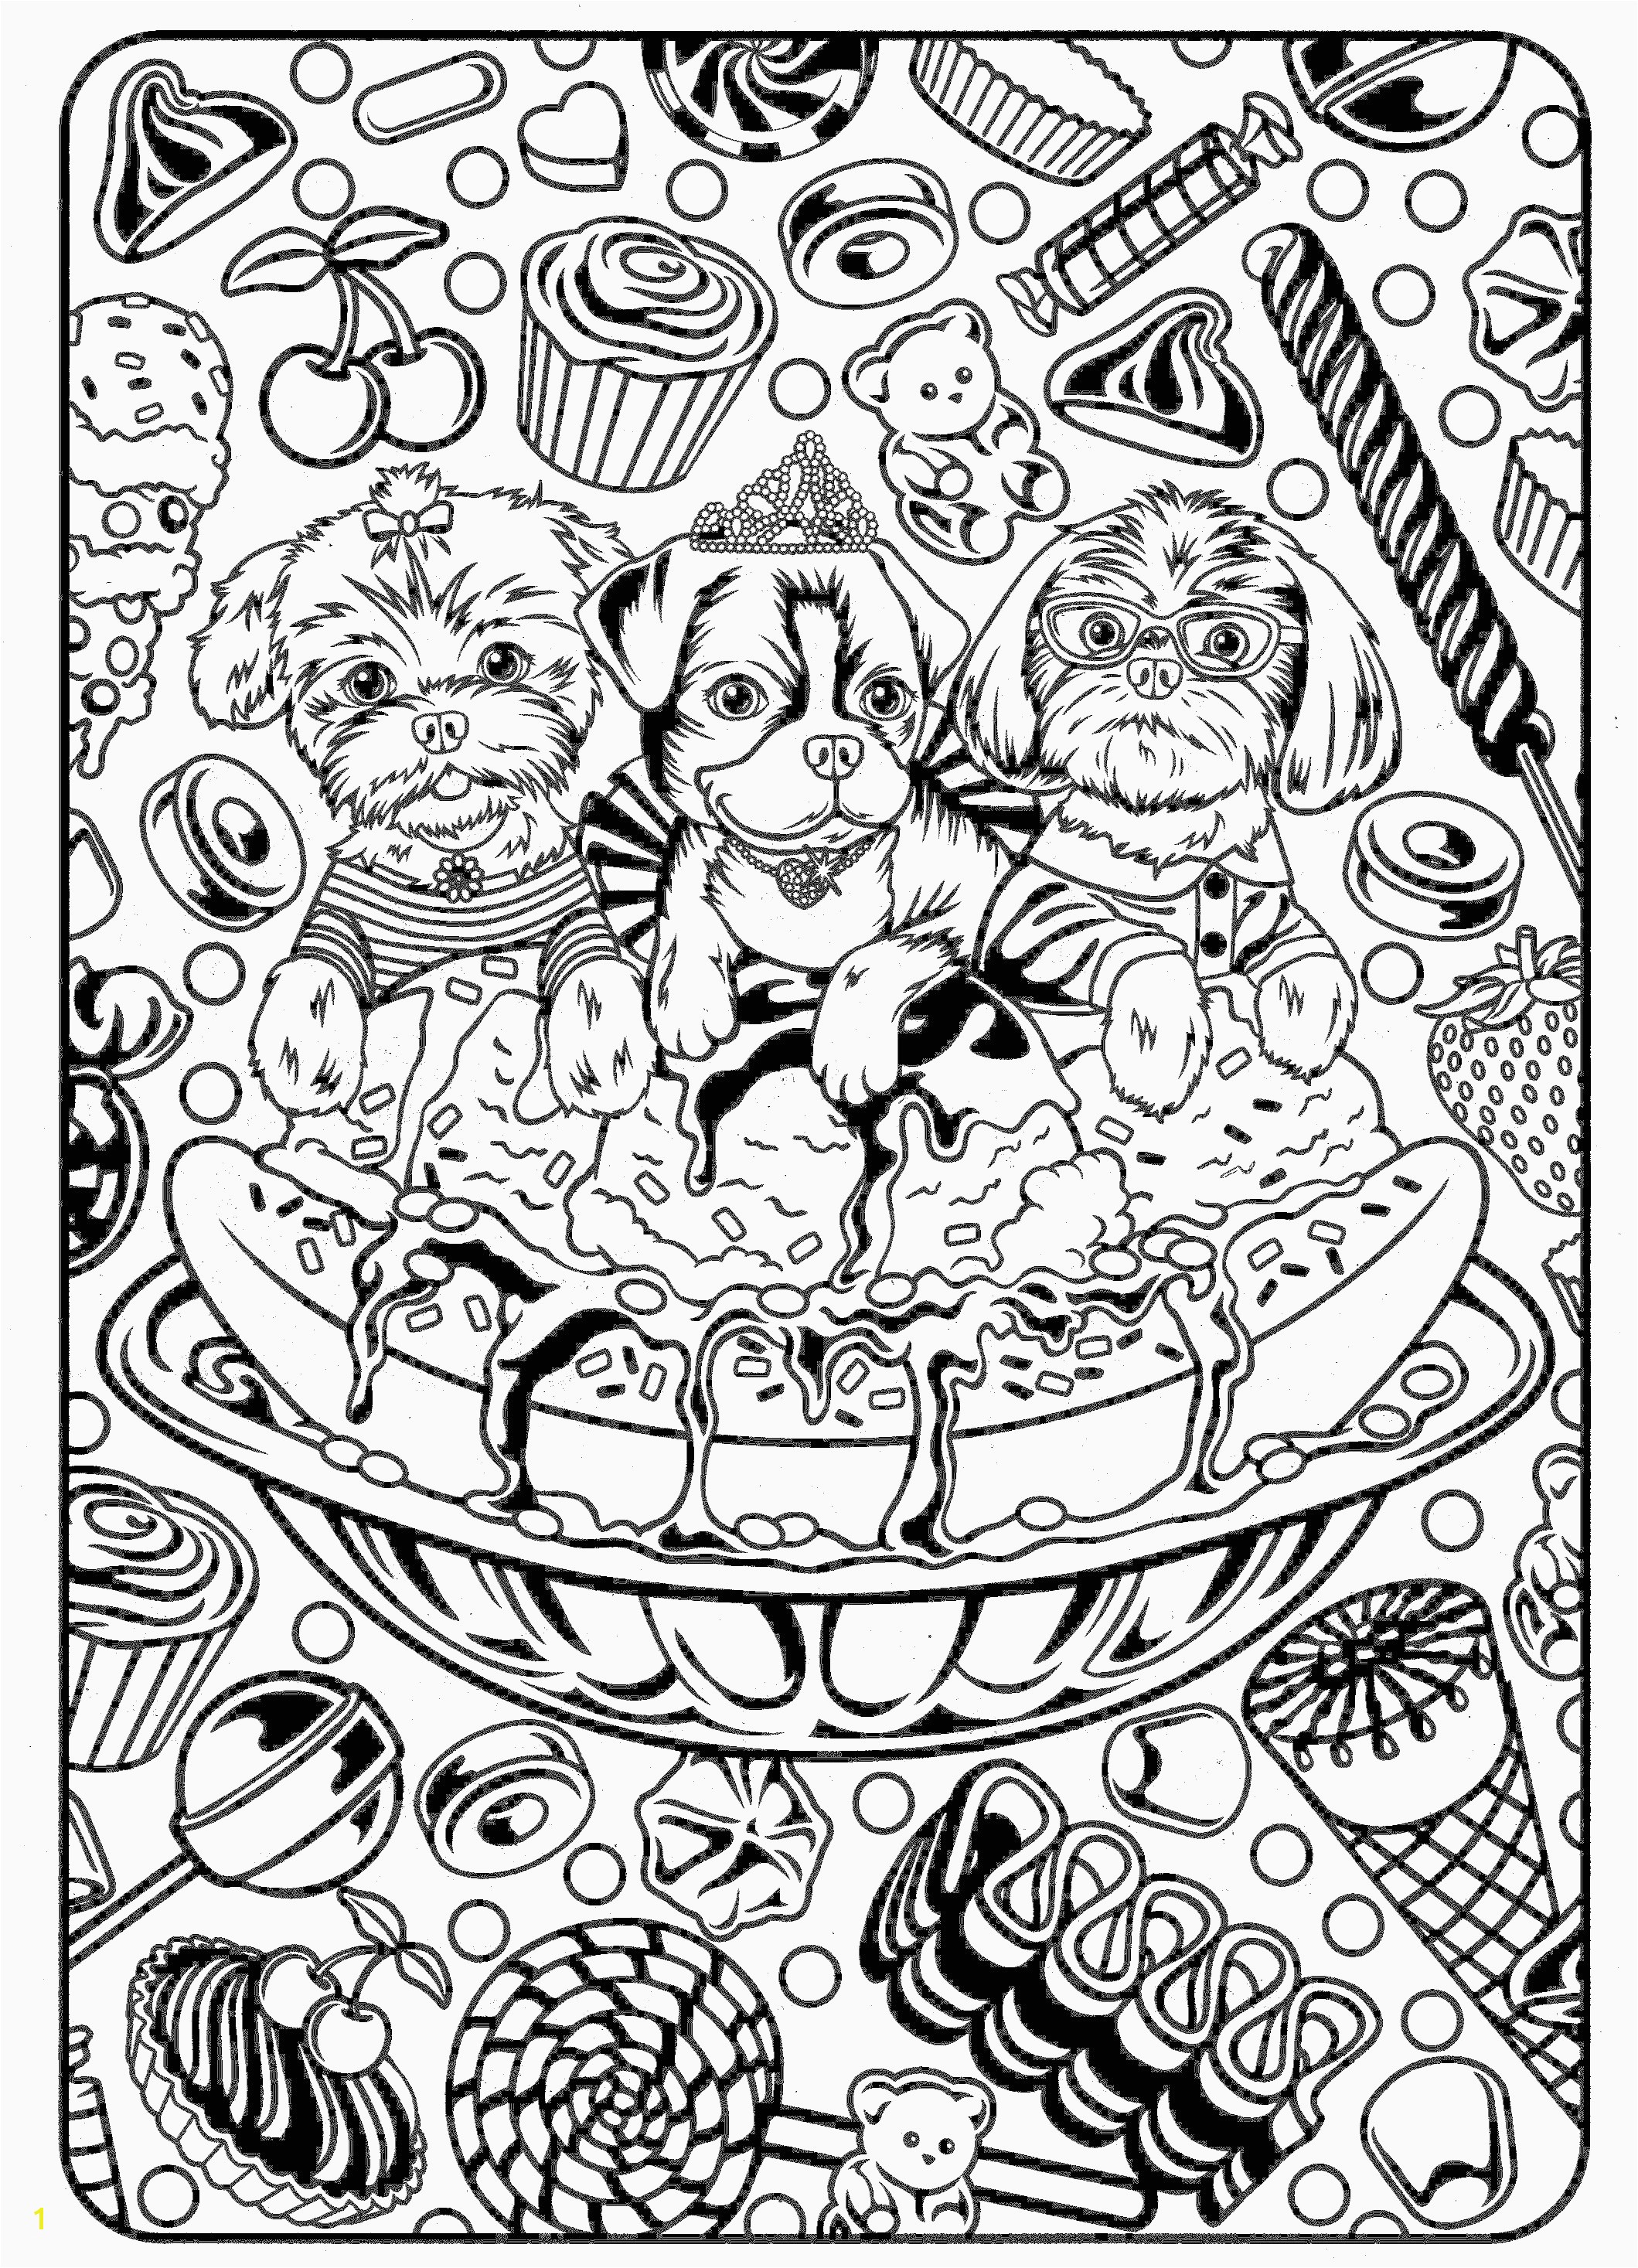 Edgar Allan Poe Coloring Pages Best Farm Coloring Sheets Coloring Pages